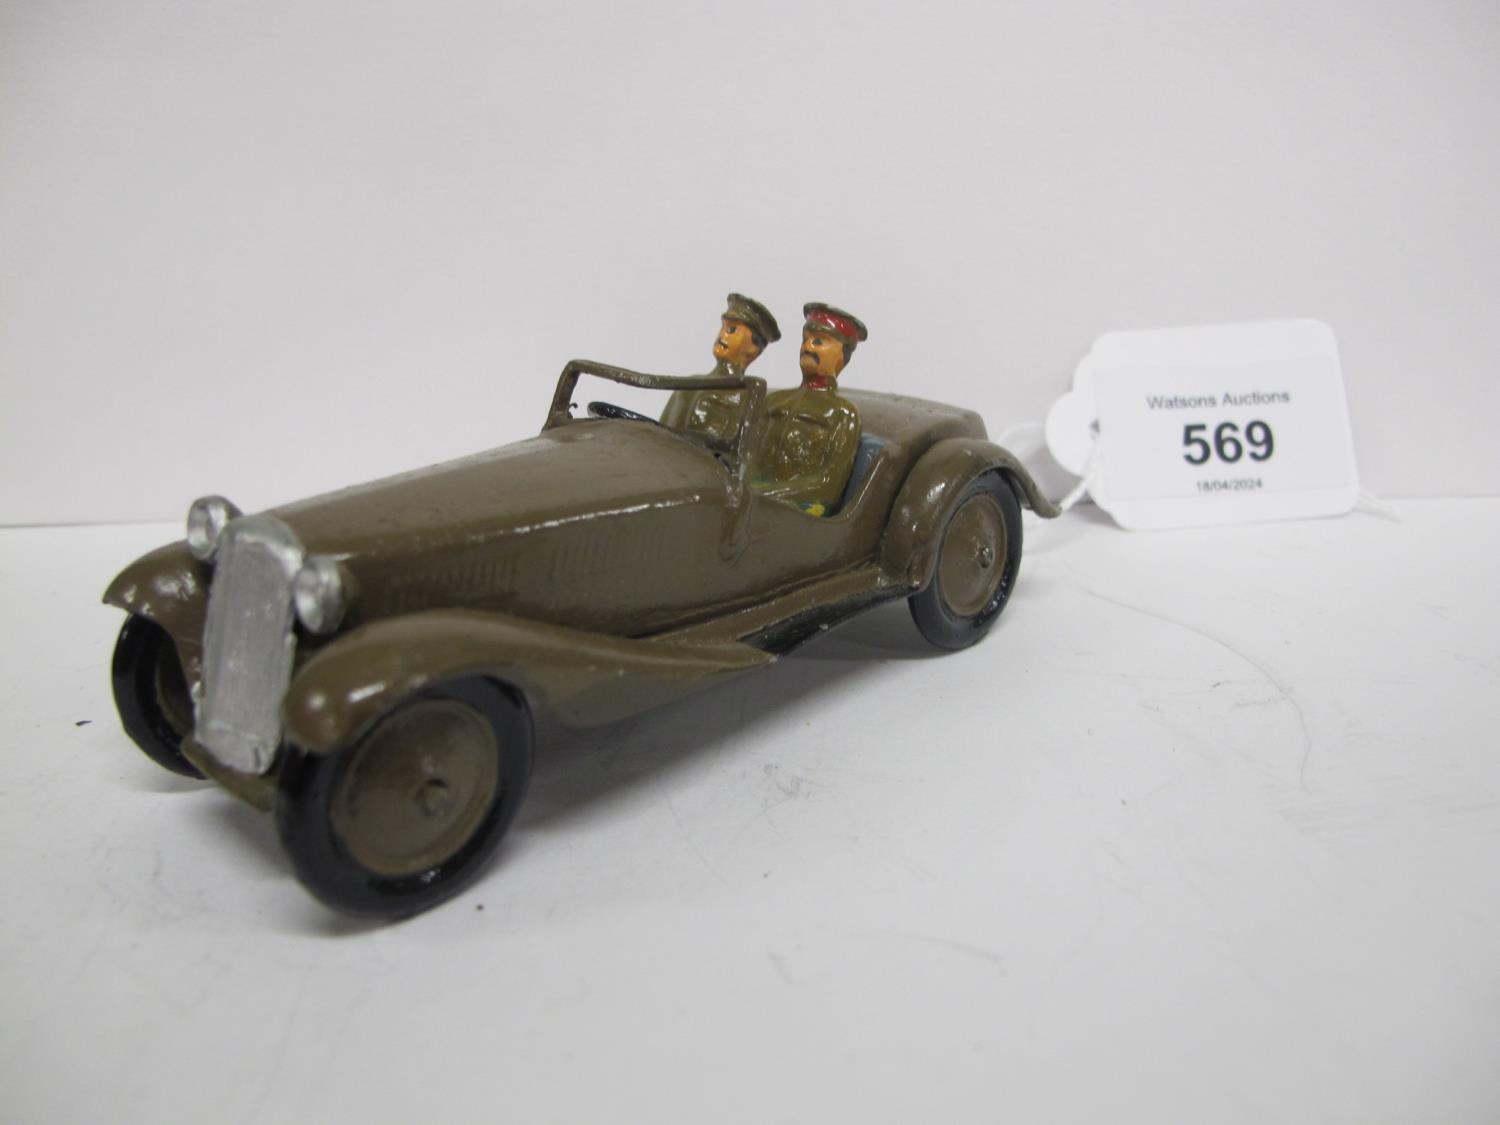 Britains staff car with removable officers (repainted and reproduction) - 4.25" long Please note de